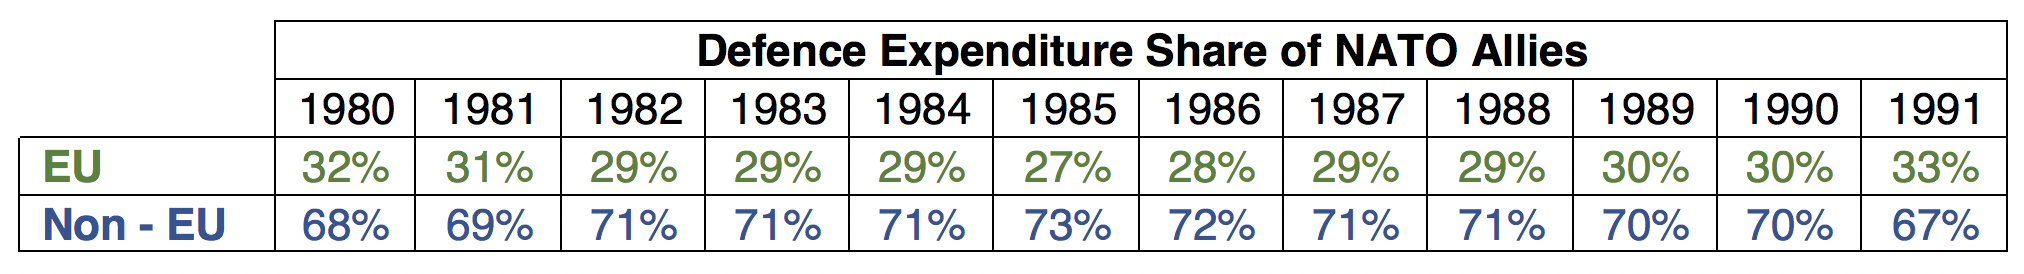 Total Defence Expenditure Share of NATO Allies (1980 - 1991), Source (SIPRI Military Expenditure Database)